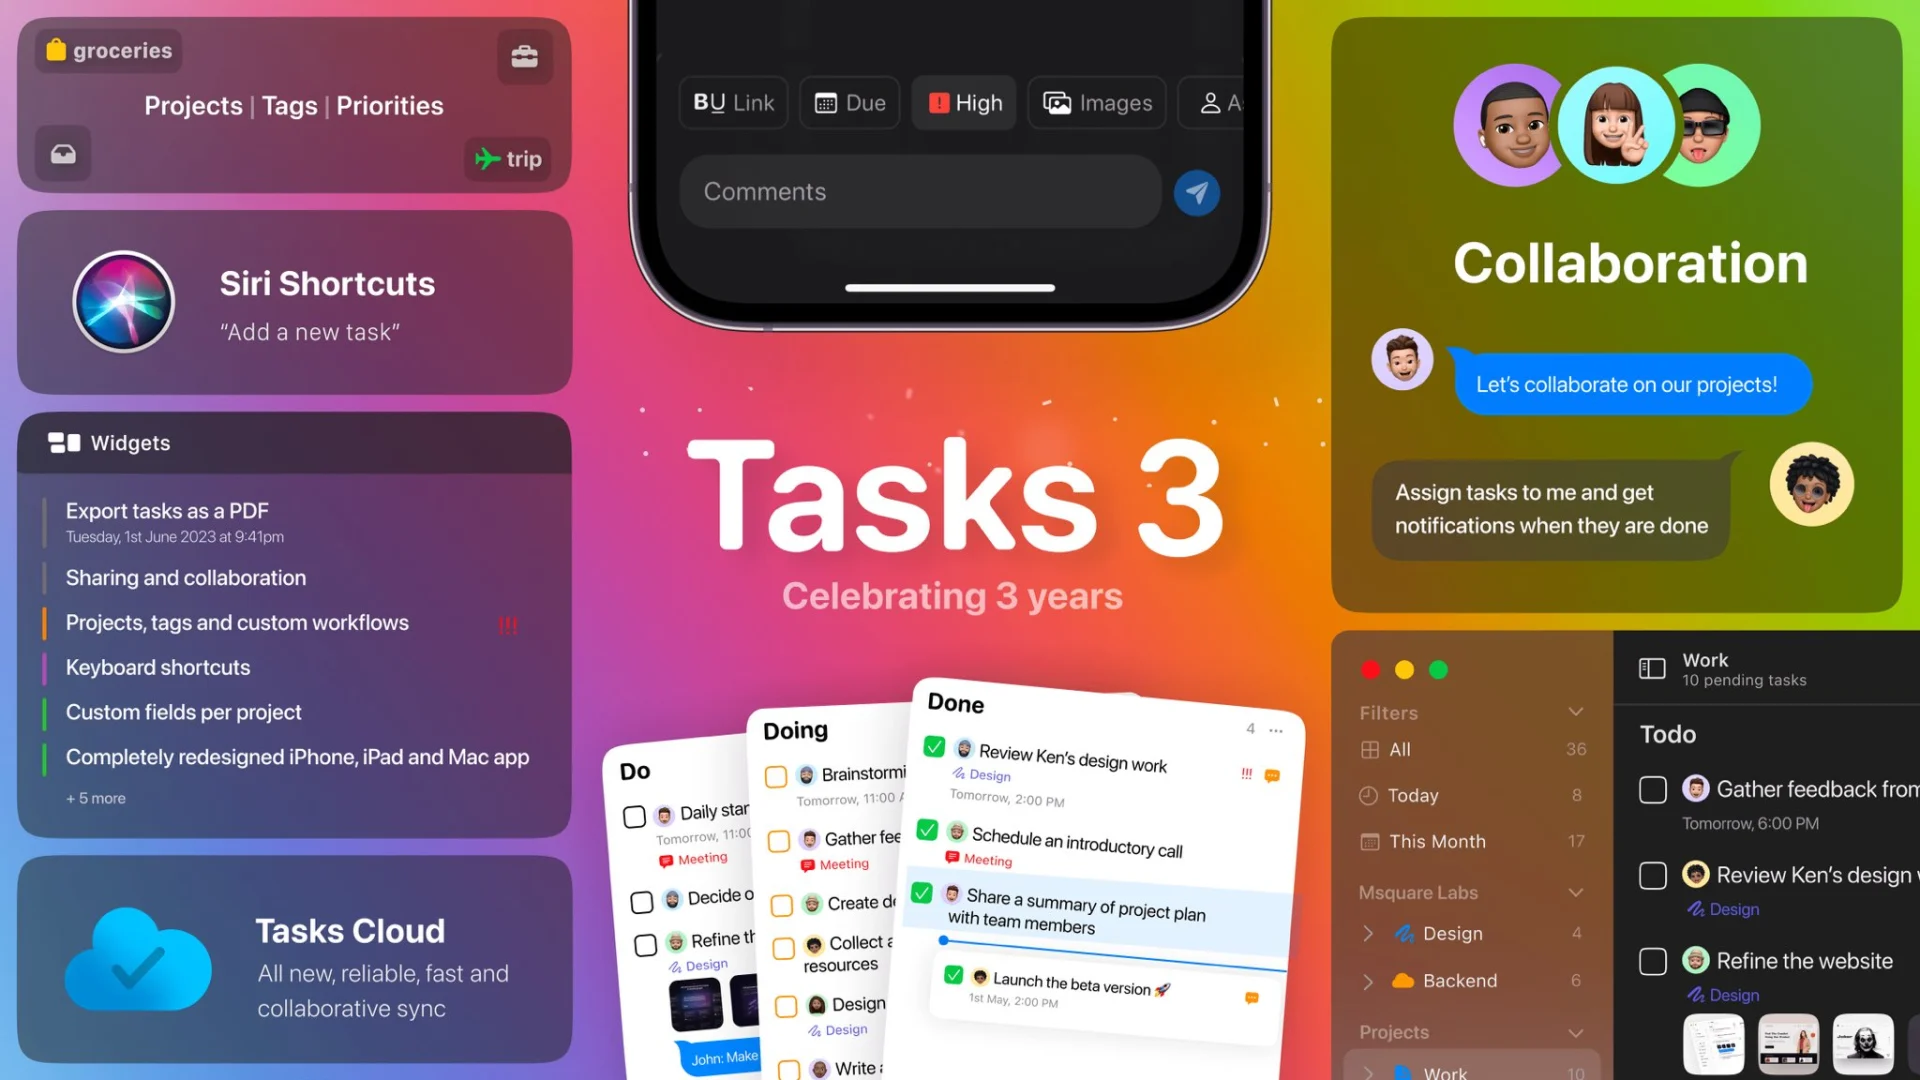 Newly Launched Tasks 3 Experience